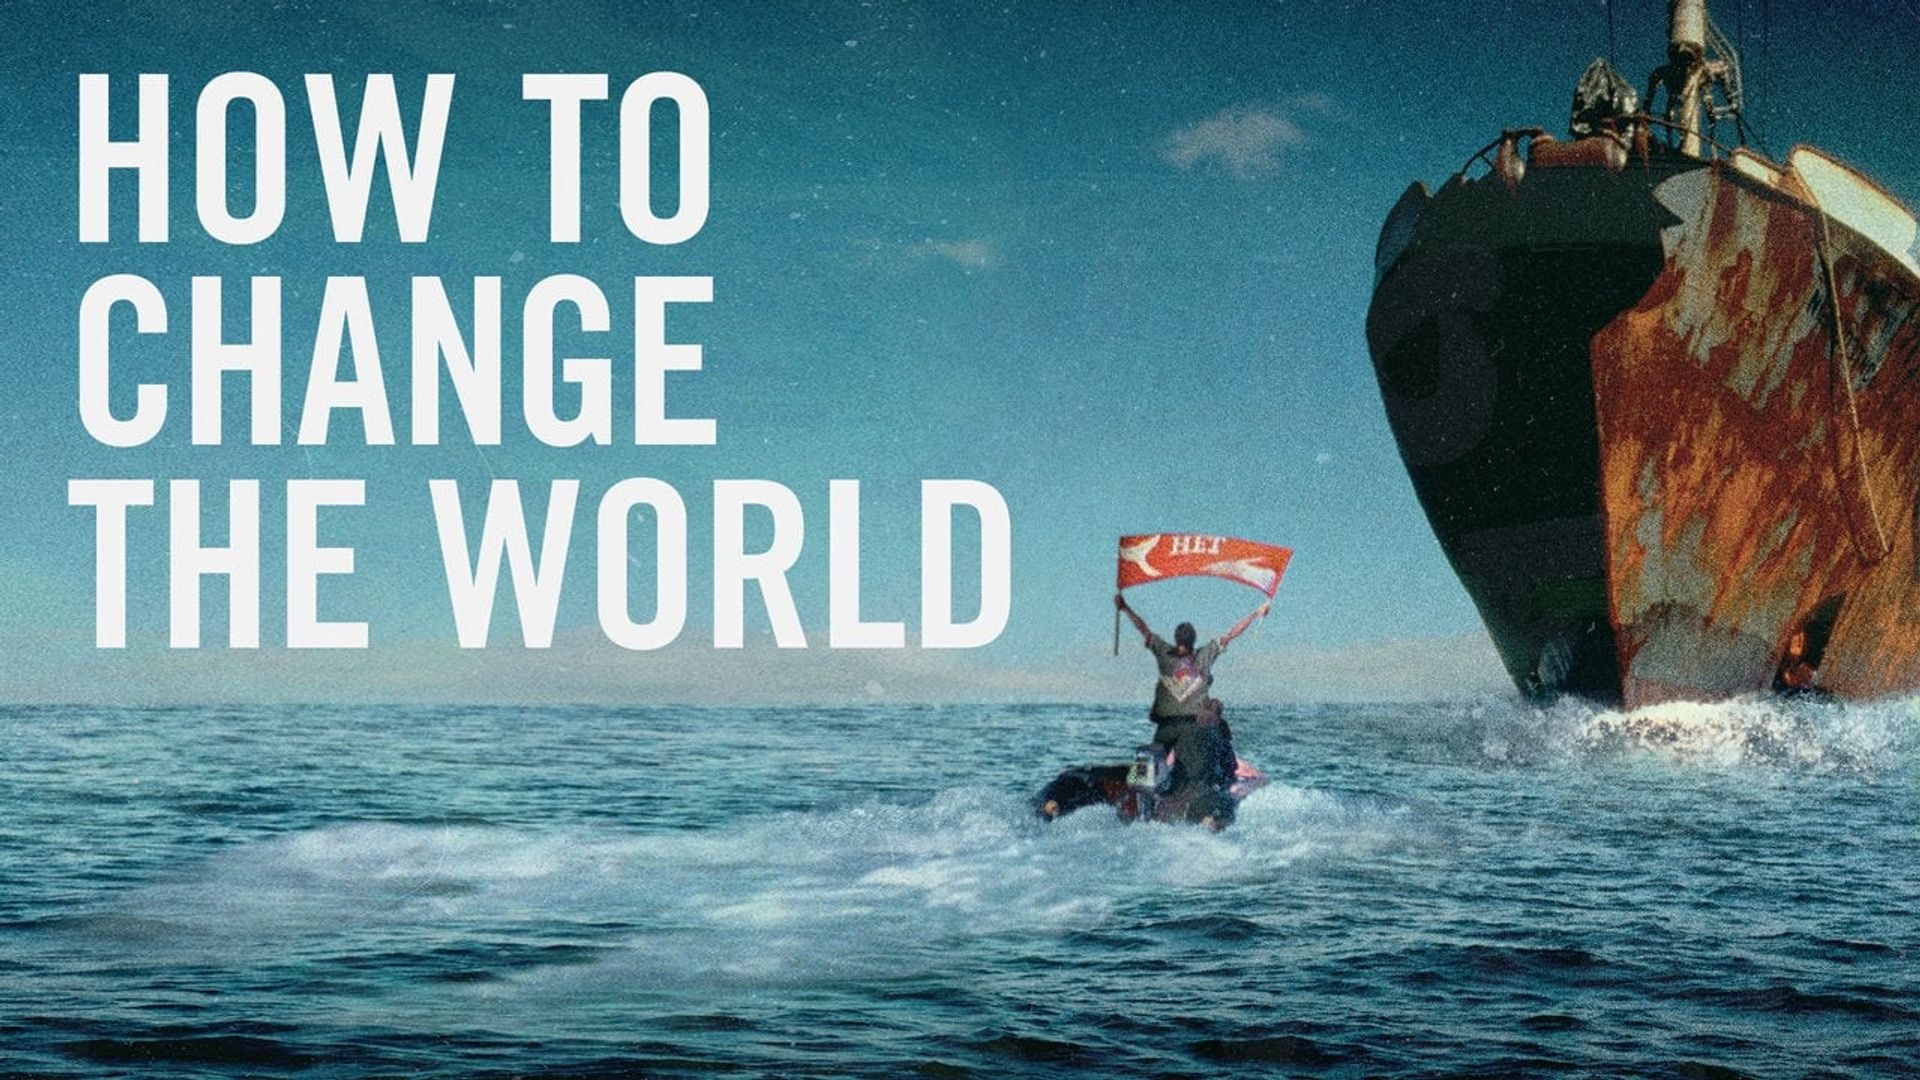 How to Change the World background